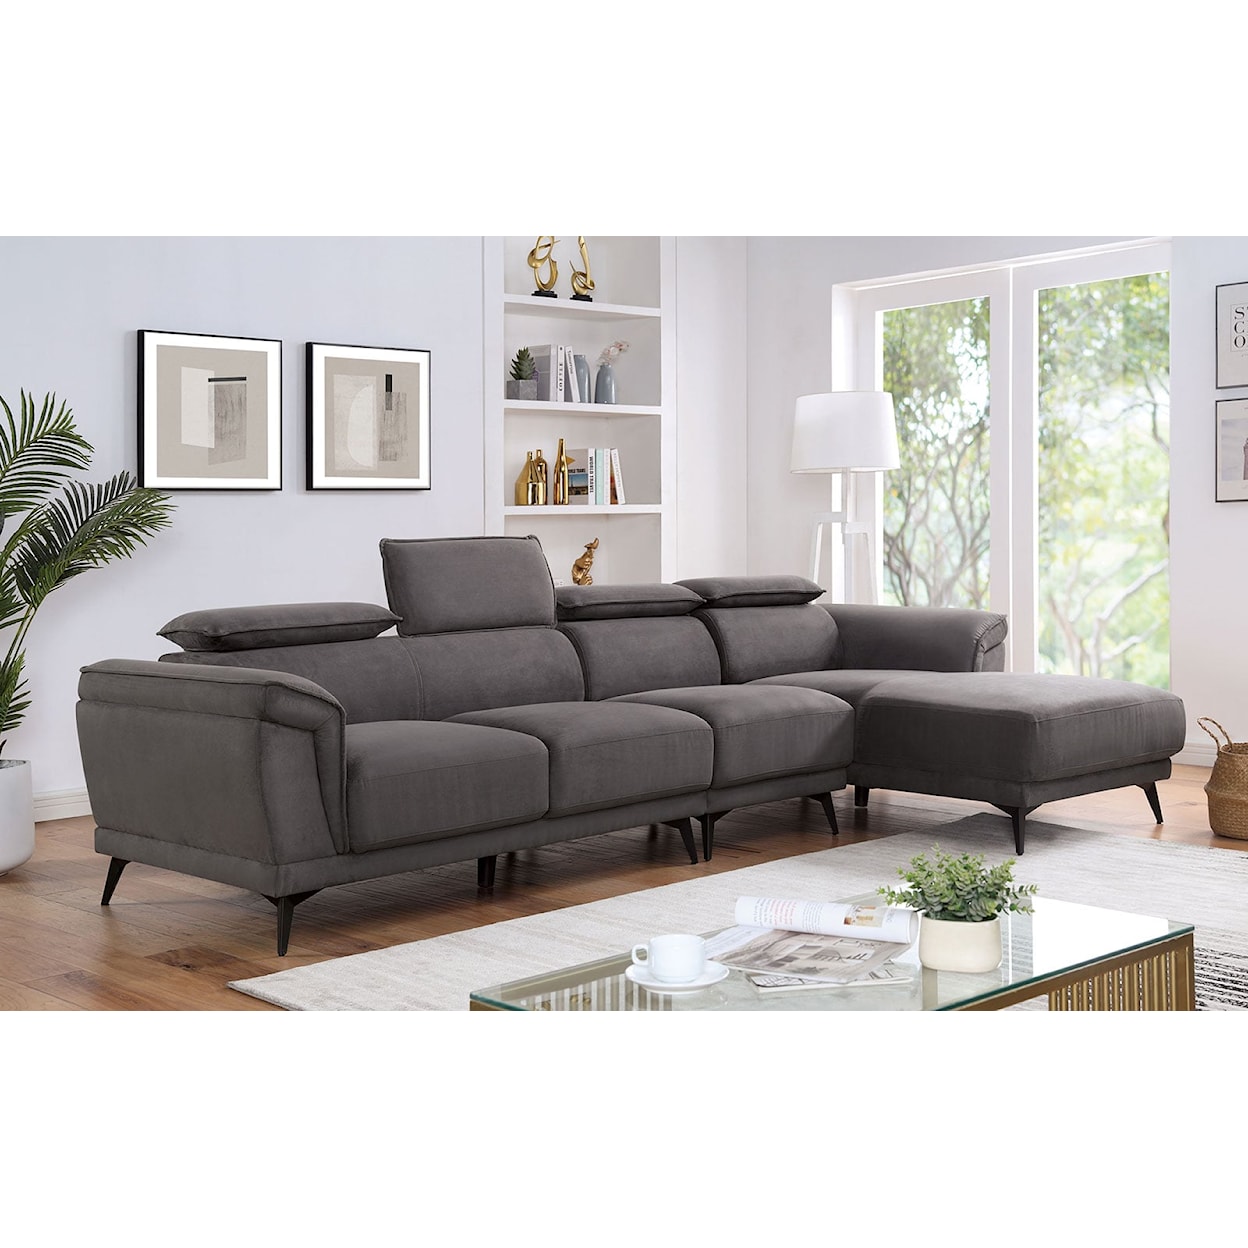 Furniture of America Napanee 3-Piece Sectional with Armless Chair